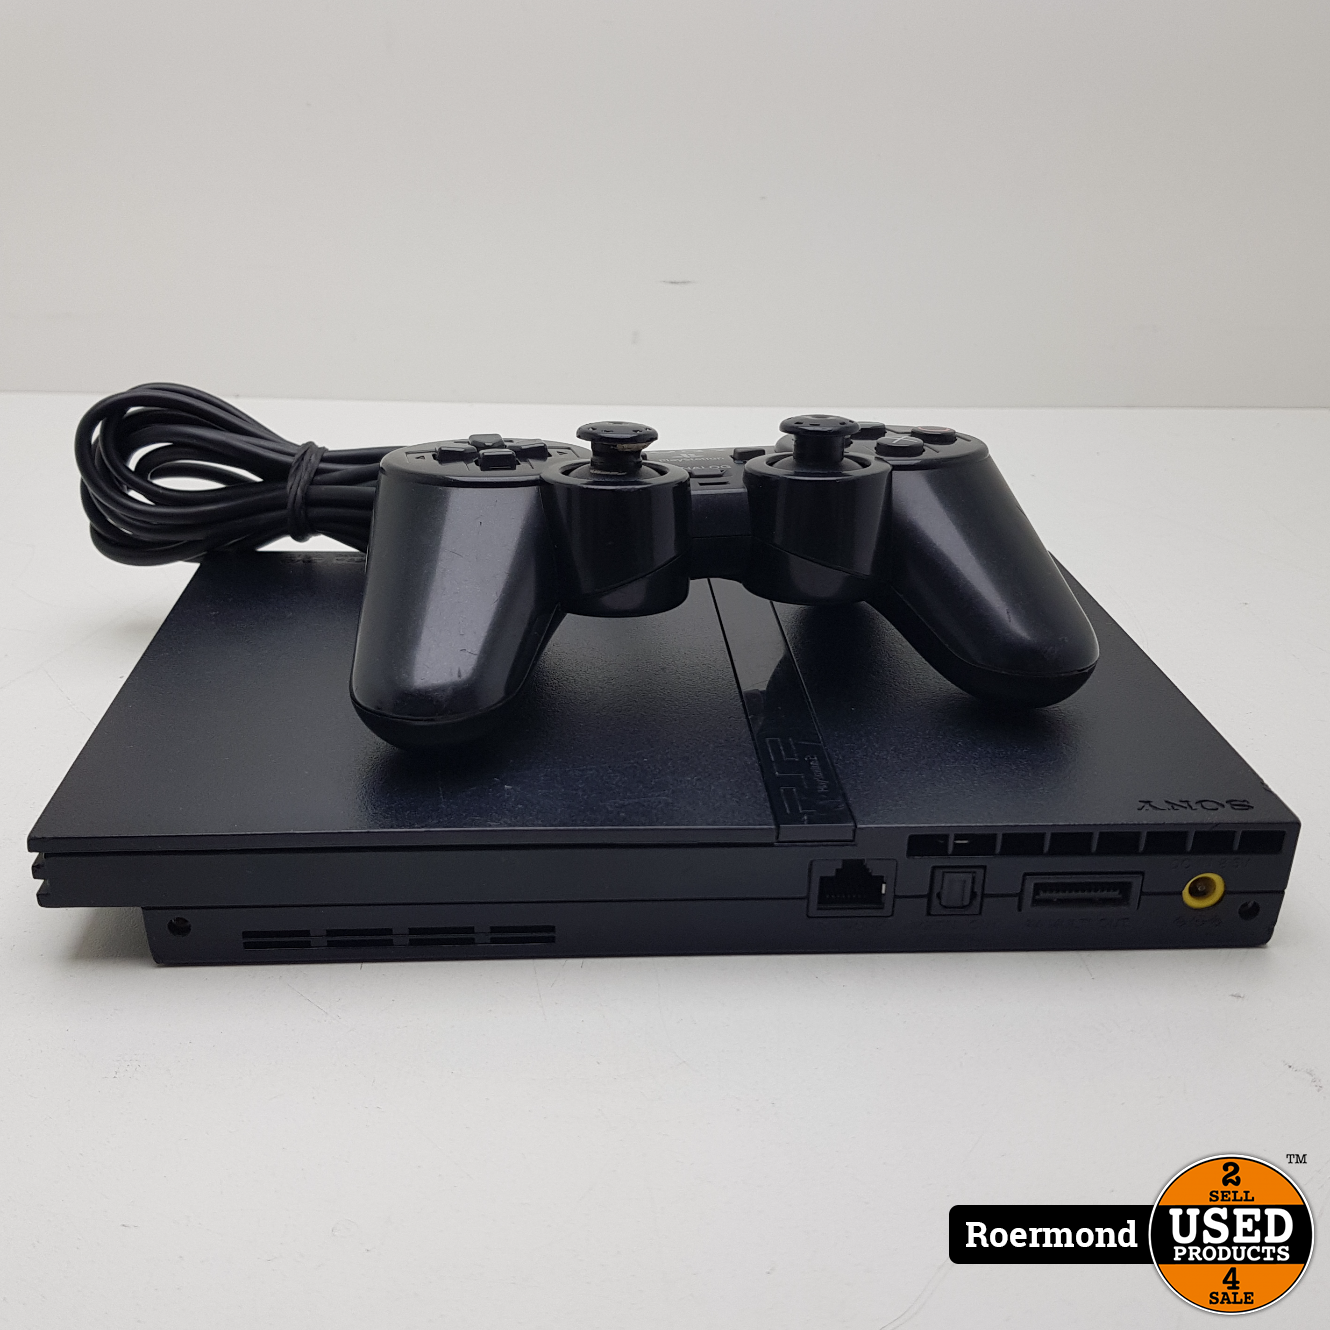 Sony PlayStation 2 console 69.99 8BitBeyond – retro game store uk